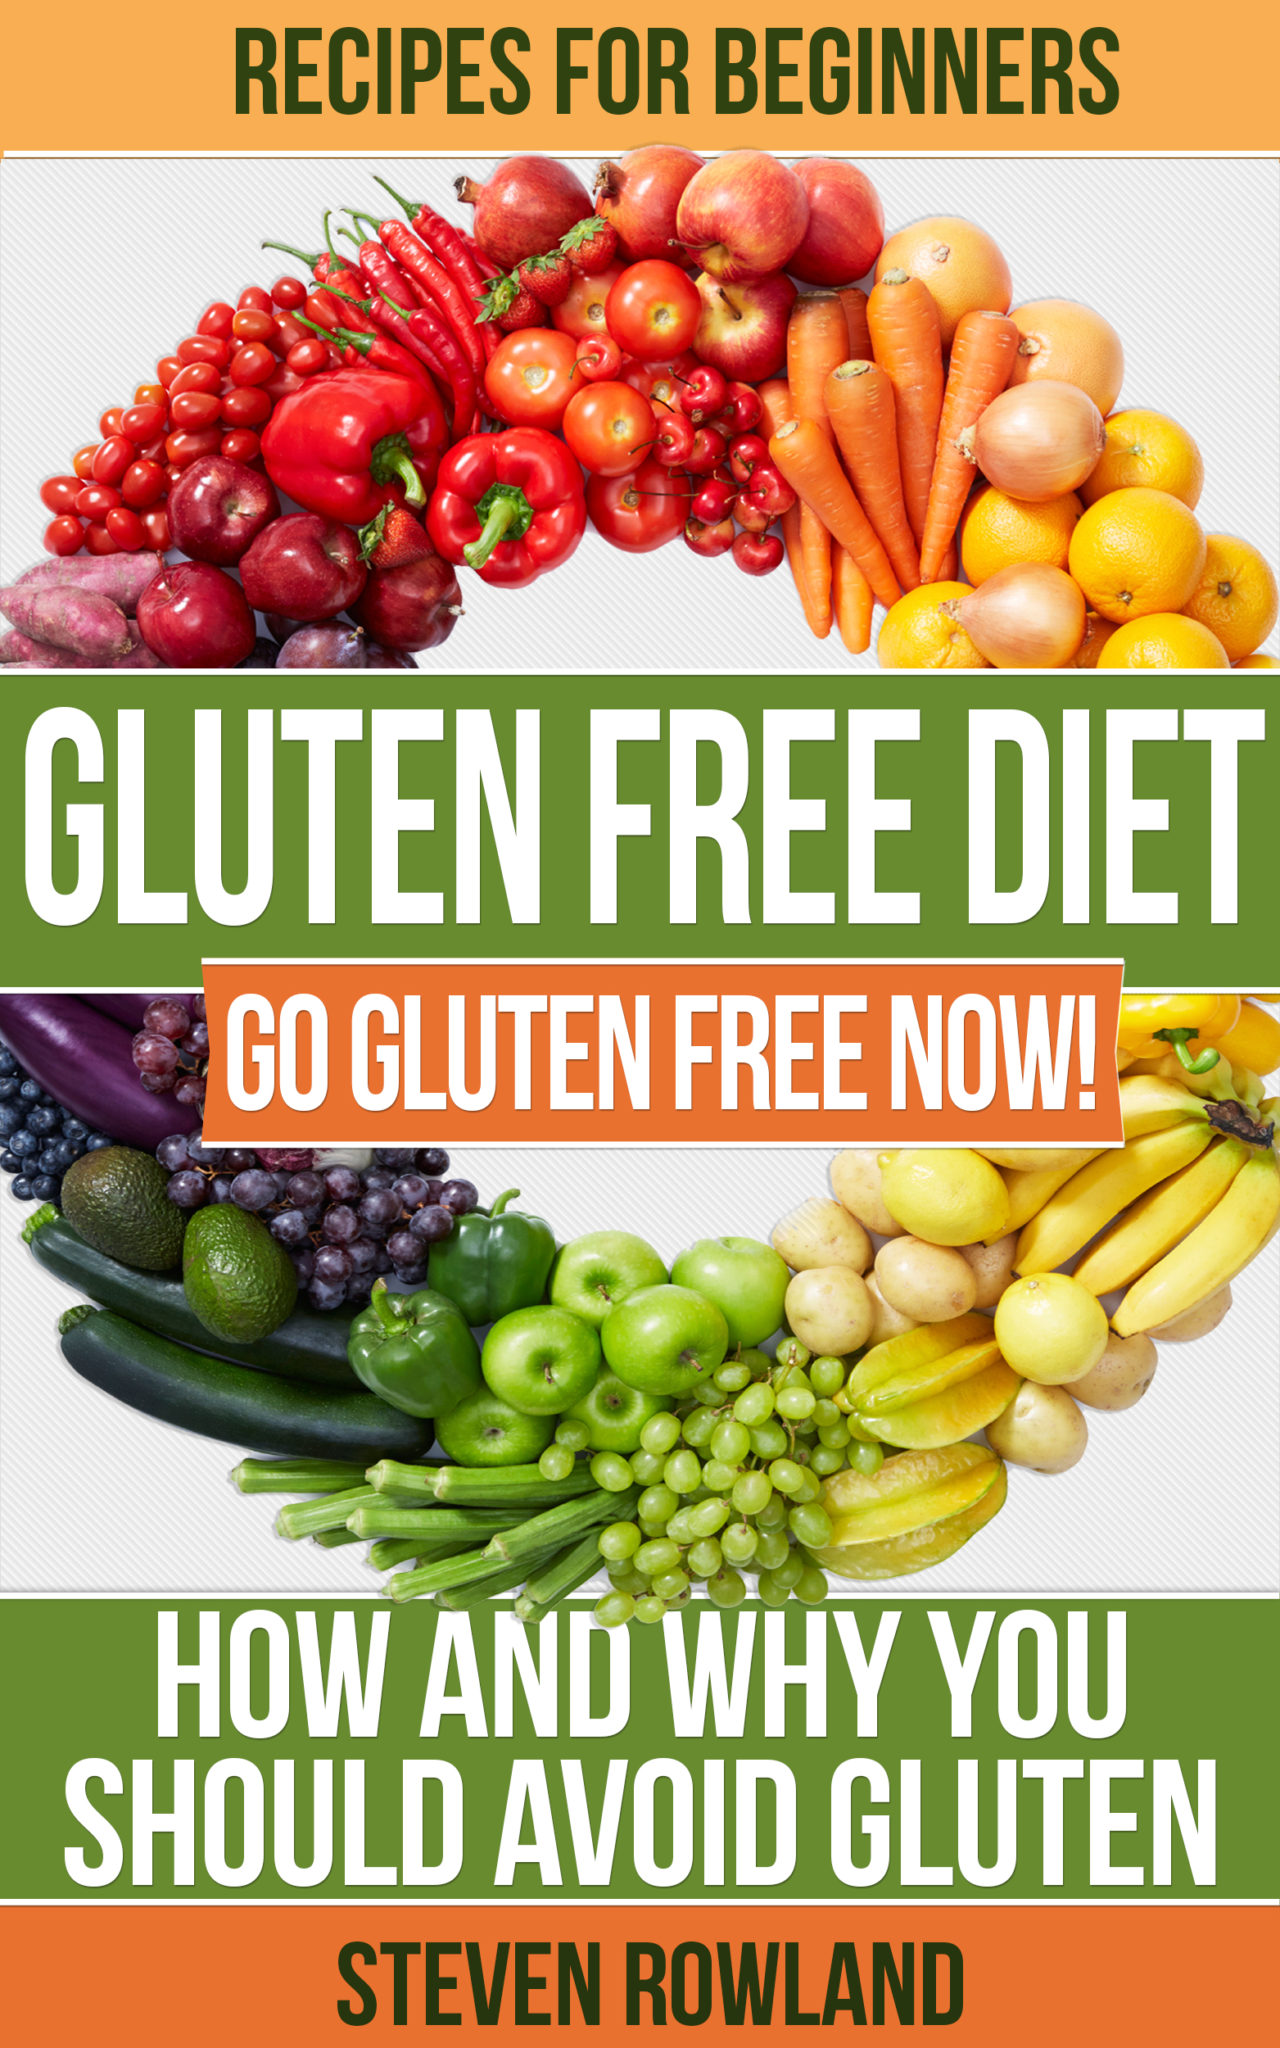 FREE: Gluten Free: The Complete Guide With 50+ Recipes: Gluten Free For Beginners by Steve Rowland